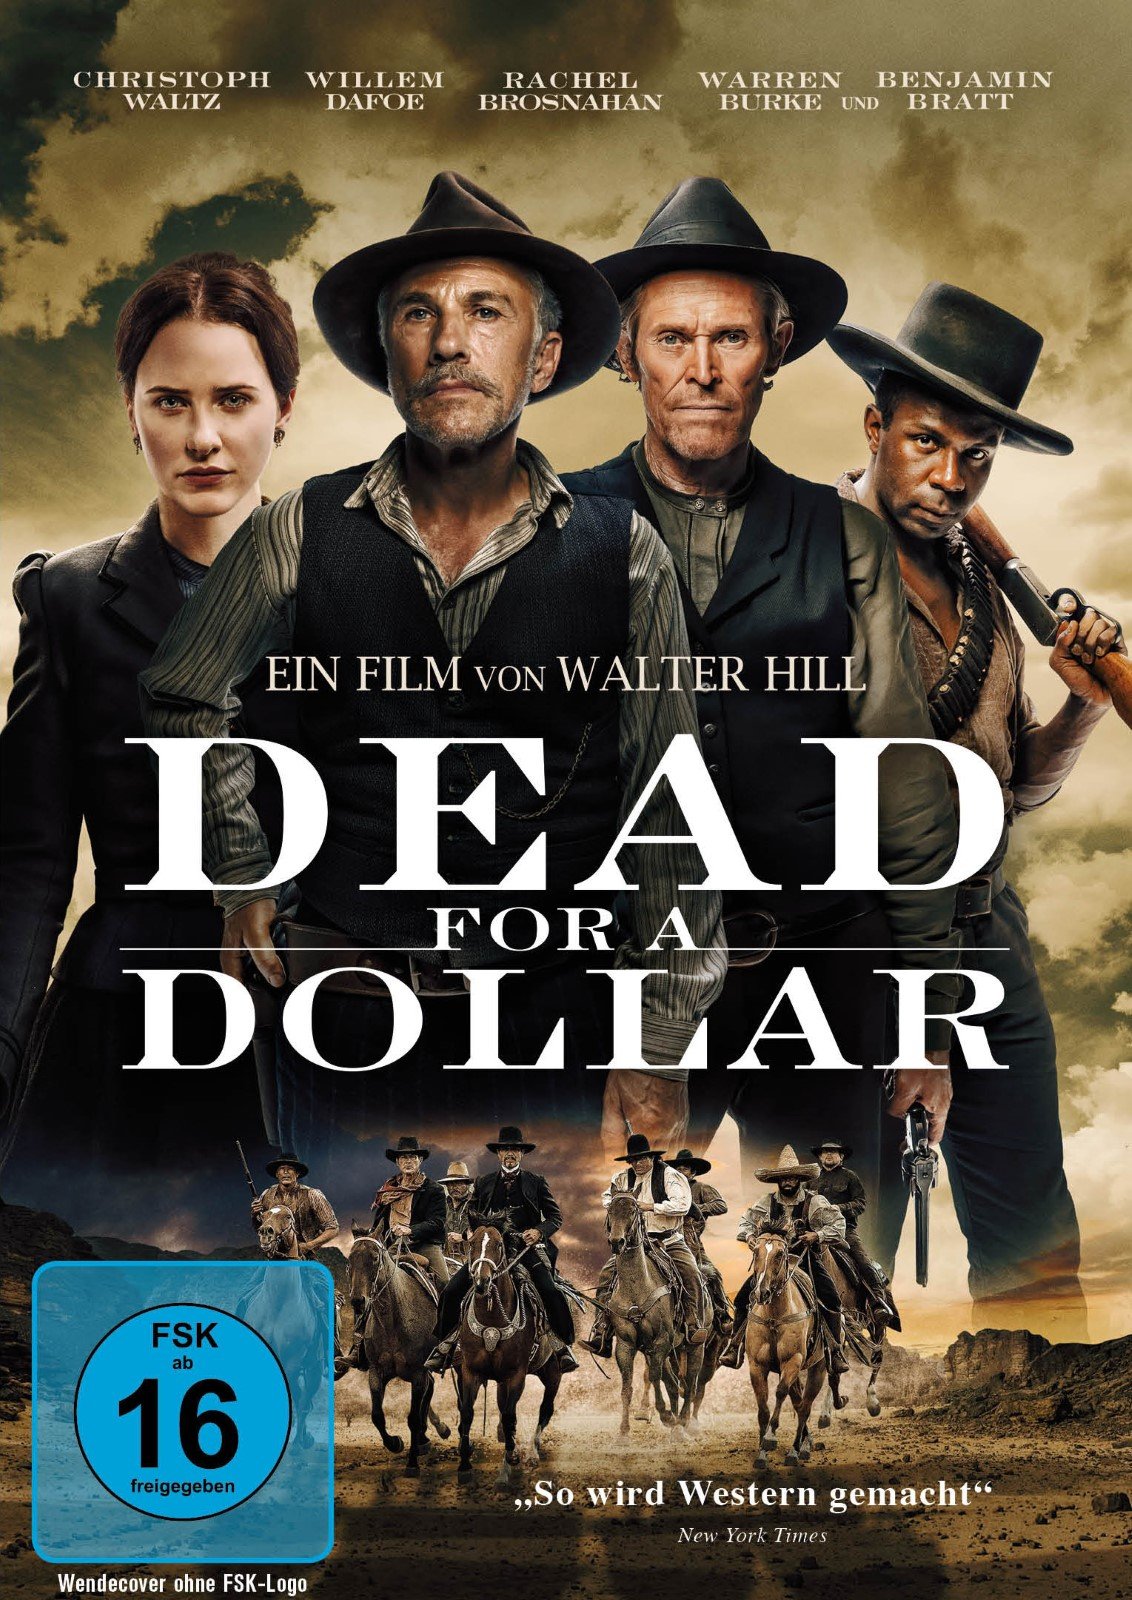 movie reviews dead for a dollar